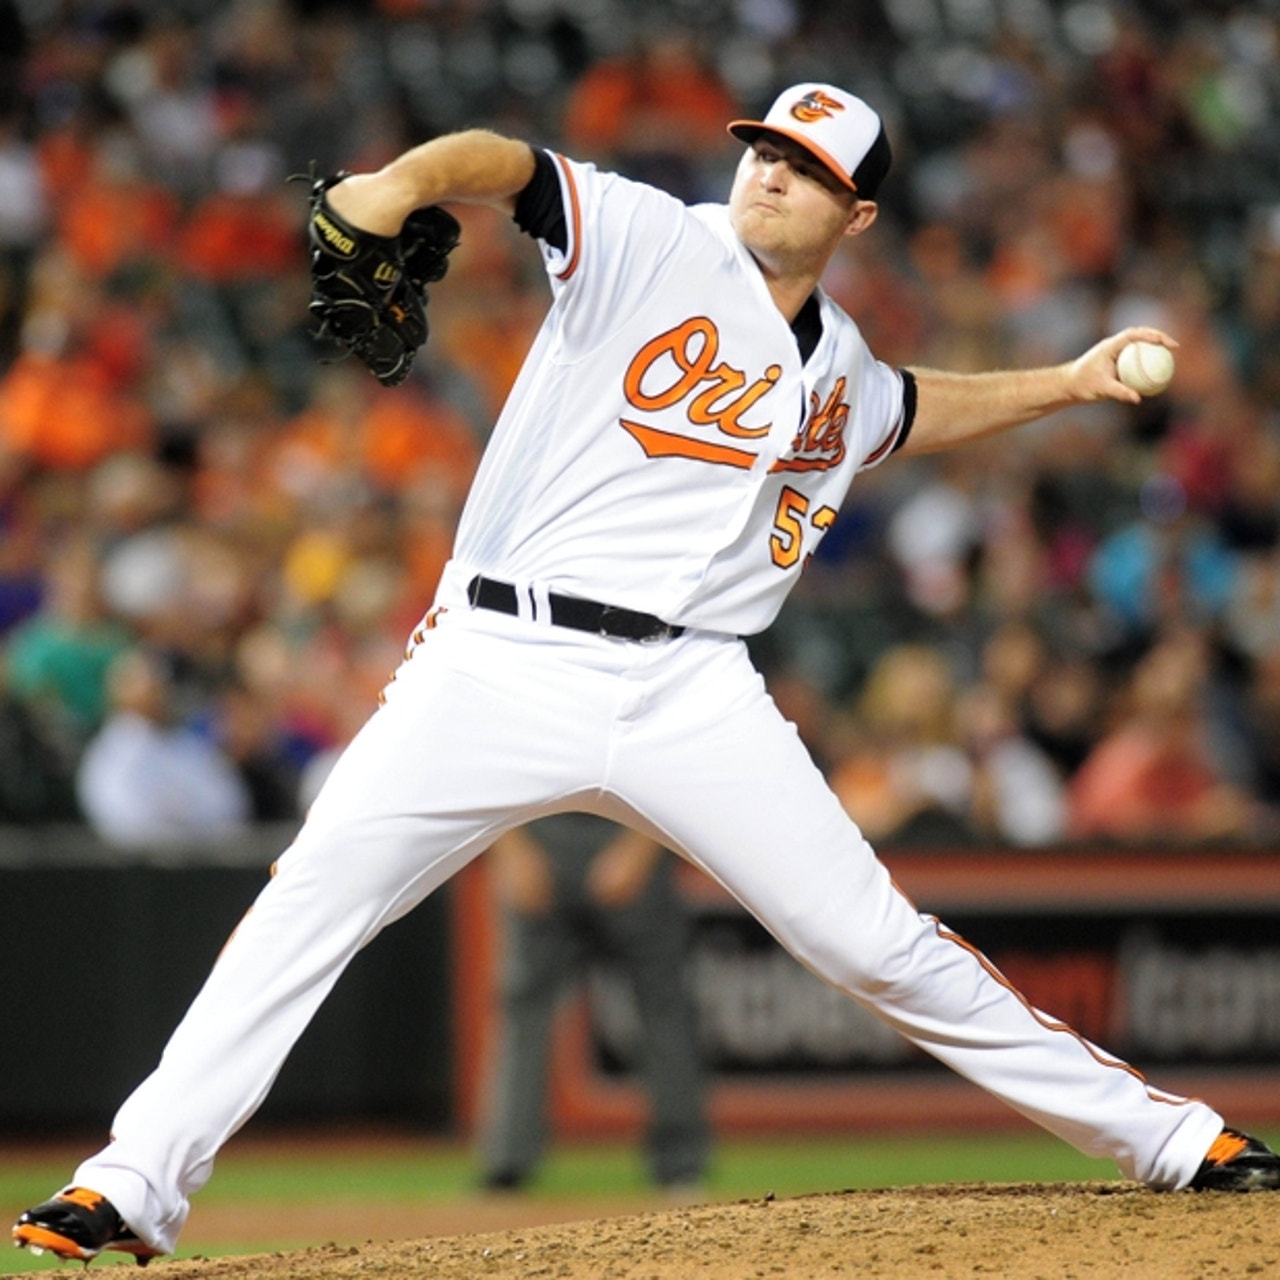 Auction features Zach Britton's game used jersey from Wild Card